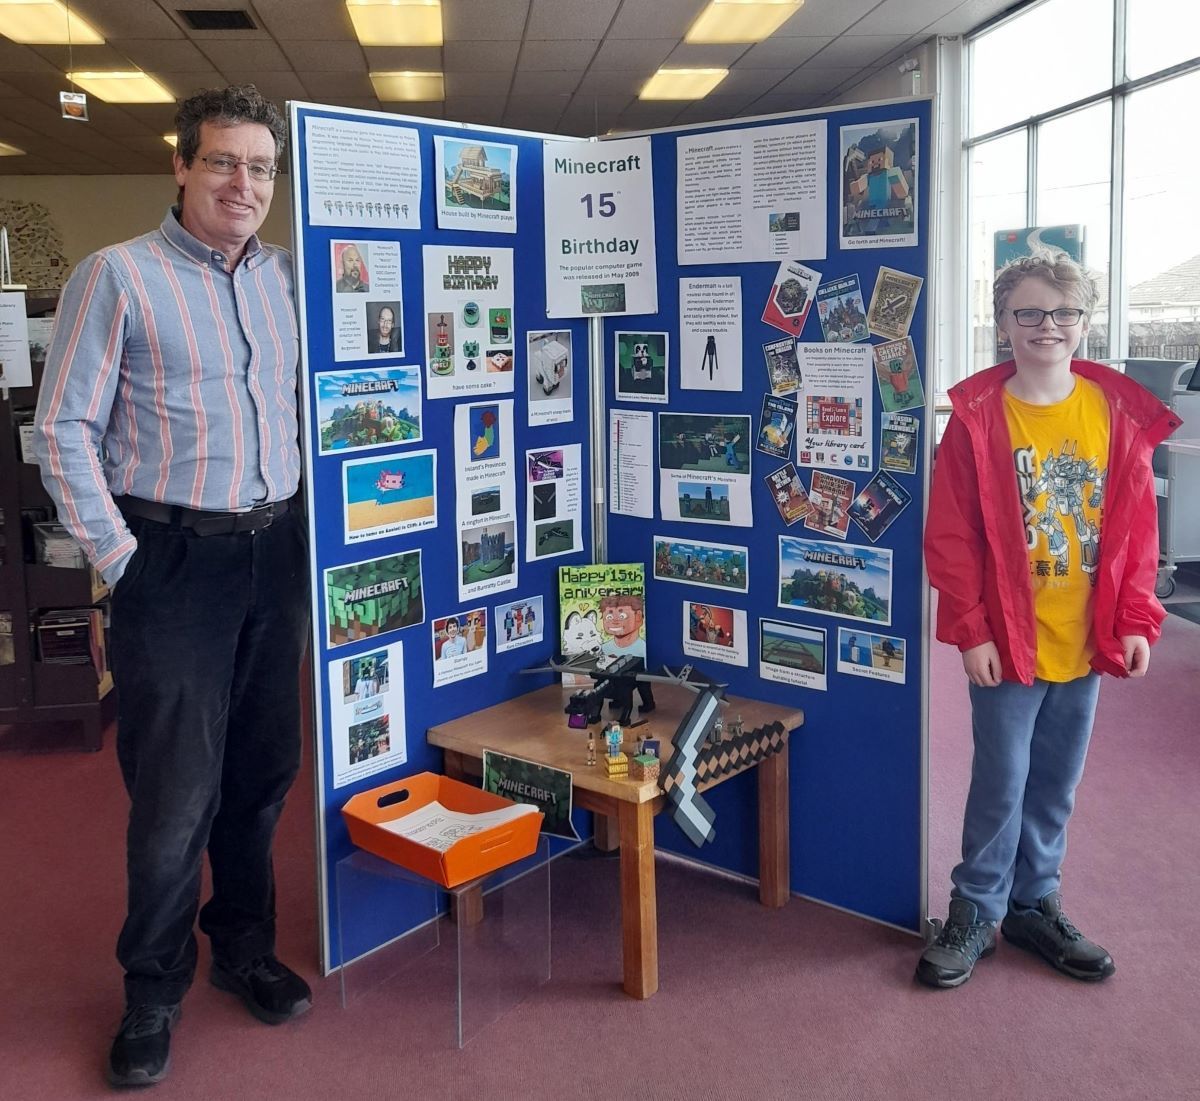 Cathal O’Farrell, aged 11, checks out the Minecraft tribute currently running at Mayfield Library. The massively popular children’s computer game is 15 years old this month, and books on the game are some of the most popularly requested at Mayfield. 🙂👍